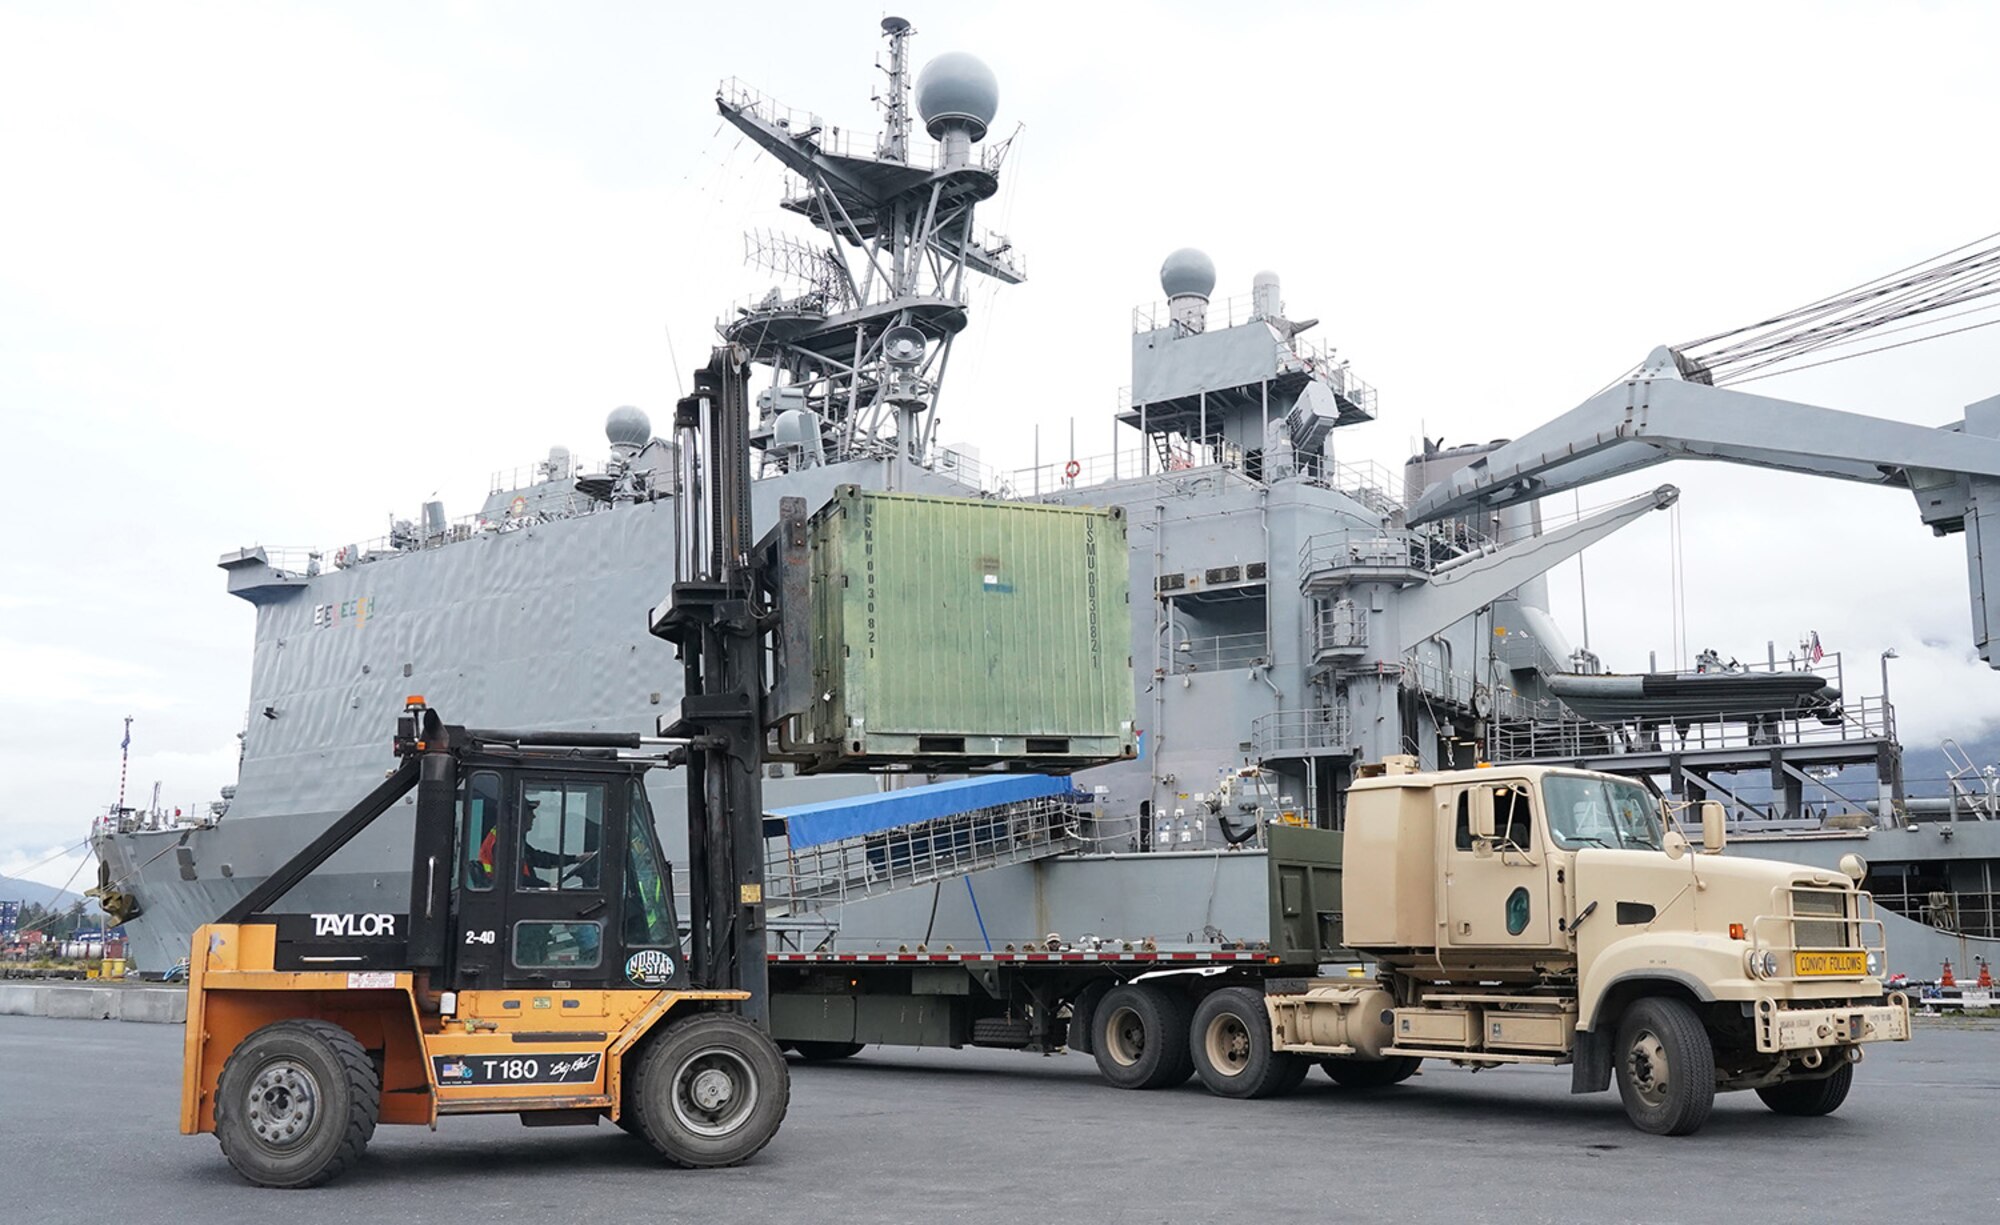 Soldiers assigned to the 109th Transportation Company, 17th Combat Support Sustainment Battalion, U.S. Army Alaska, load U.S. Marine Corps bulk fuel supplies and equipment from the U.S.S. Comstock (LSD-45), a Whidbey Island-class dock landing ship, on an M872 trailer at the port of Seward, Alaska, Sept. 19, 2019, for transport to Joint Base Elmendorf-Richardson, Alaska. The U.S. Navy is conducting an Arctic Expeditionary Capabilities Exercise to test its logistical effectiveness and joint-service interoperability while responding to conflict or disaster in an austere environment with no organic assets.